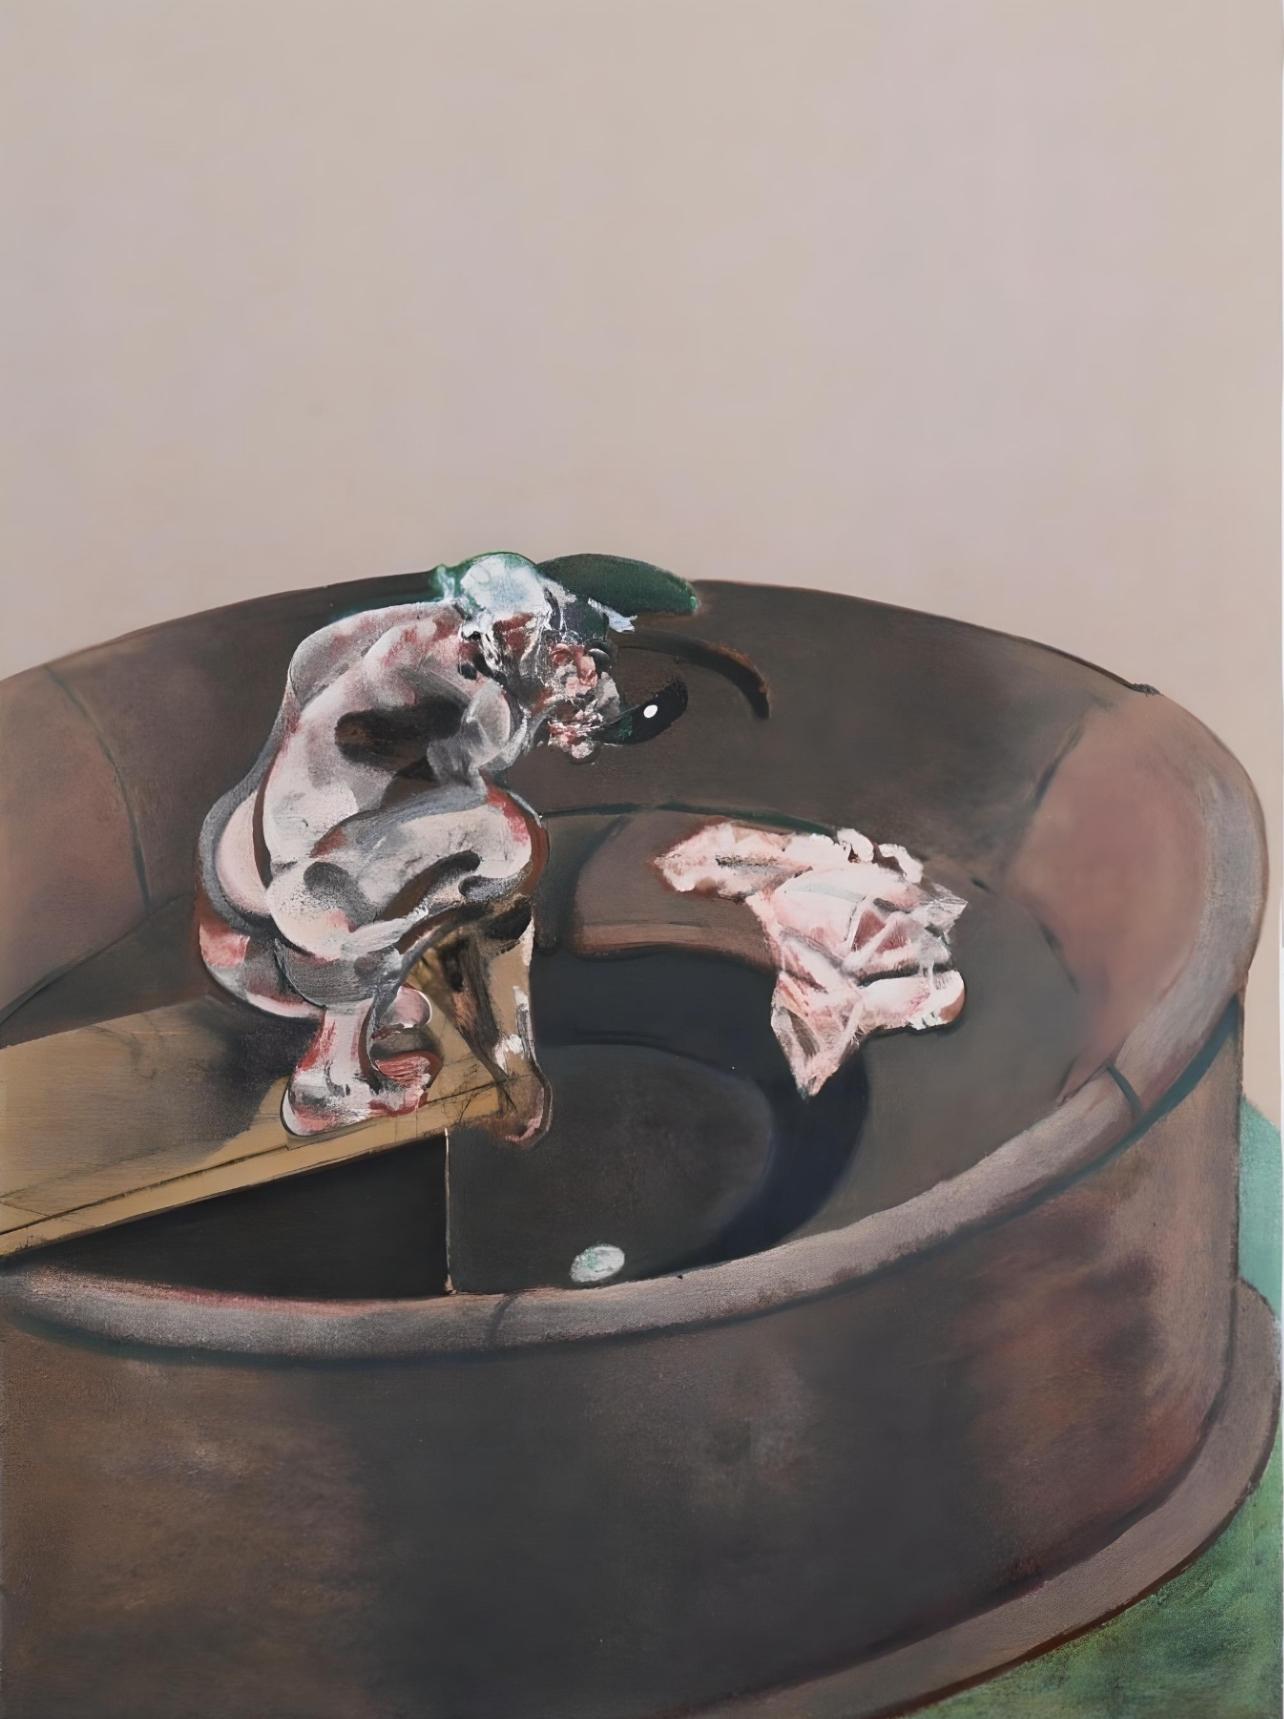 Francis Bacon Abstract Print - Bacon, Portrait of George Dyer Crouching, Derrière le miroir (after)